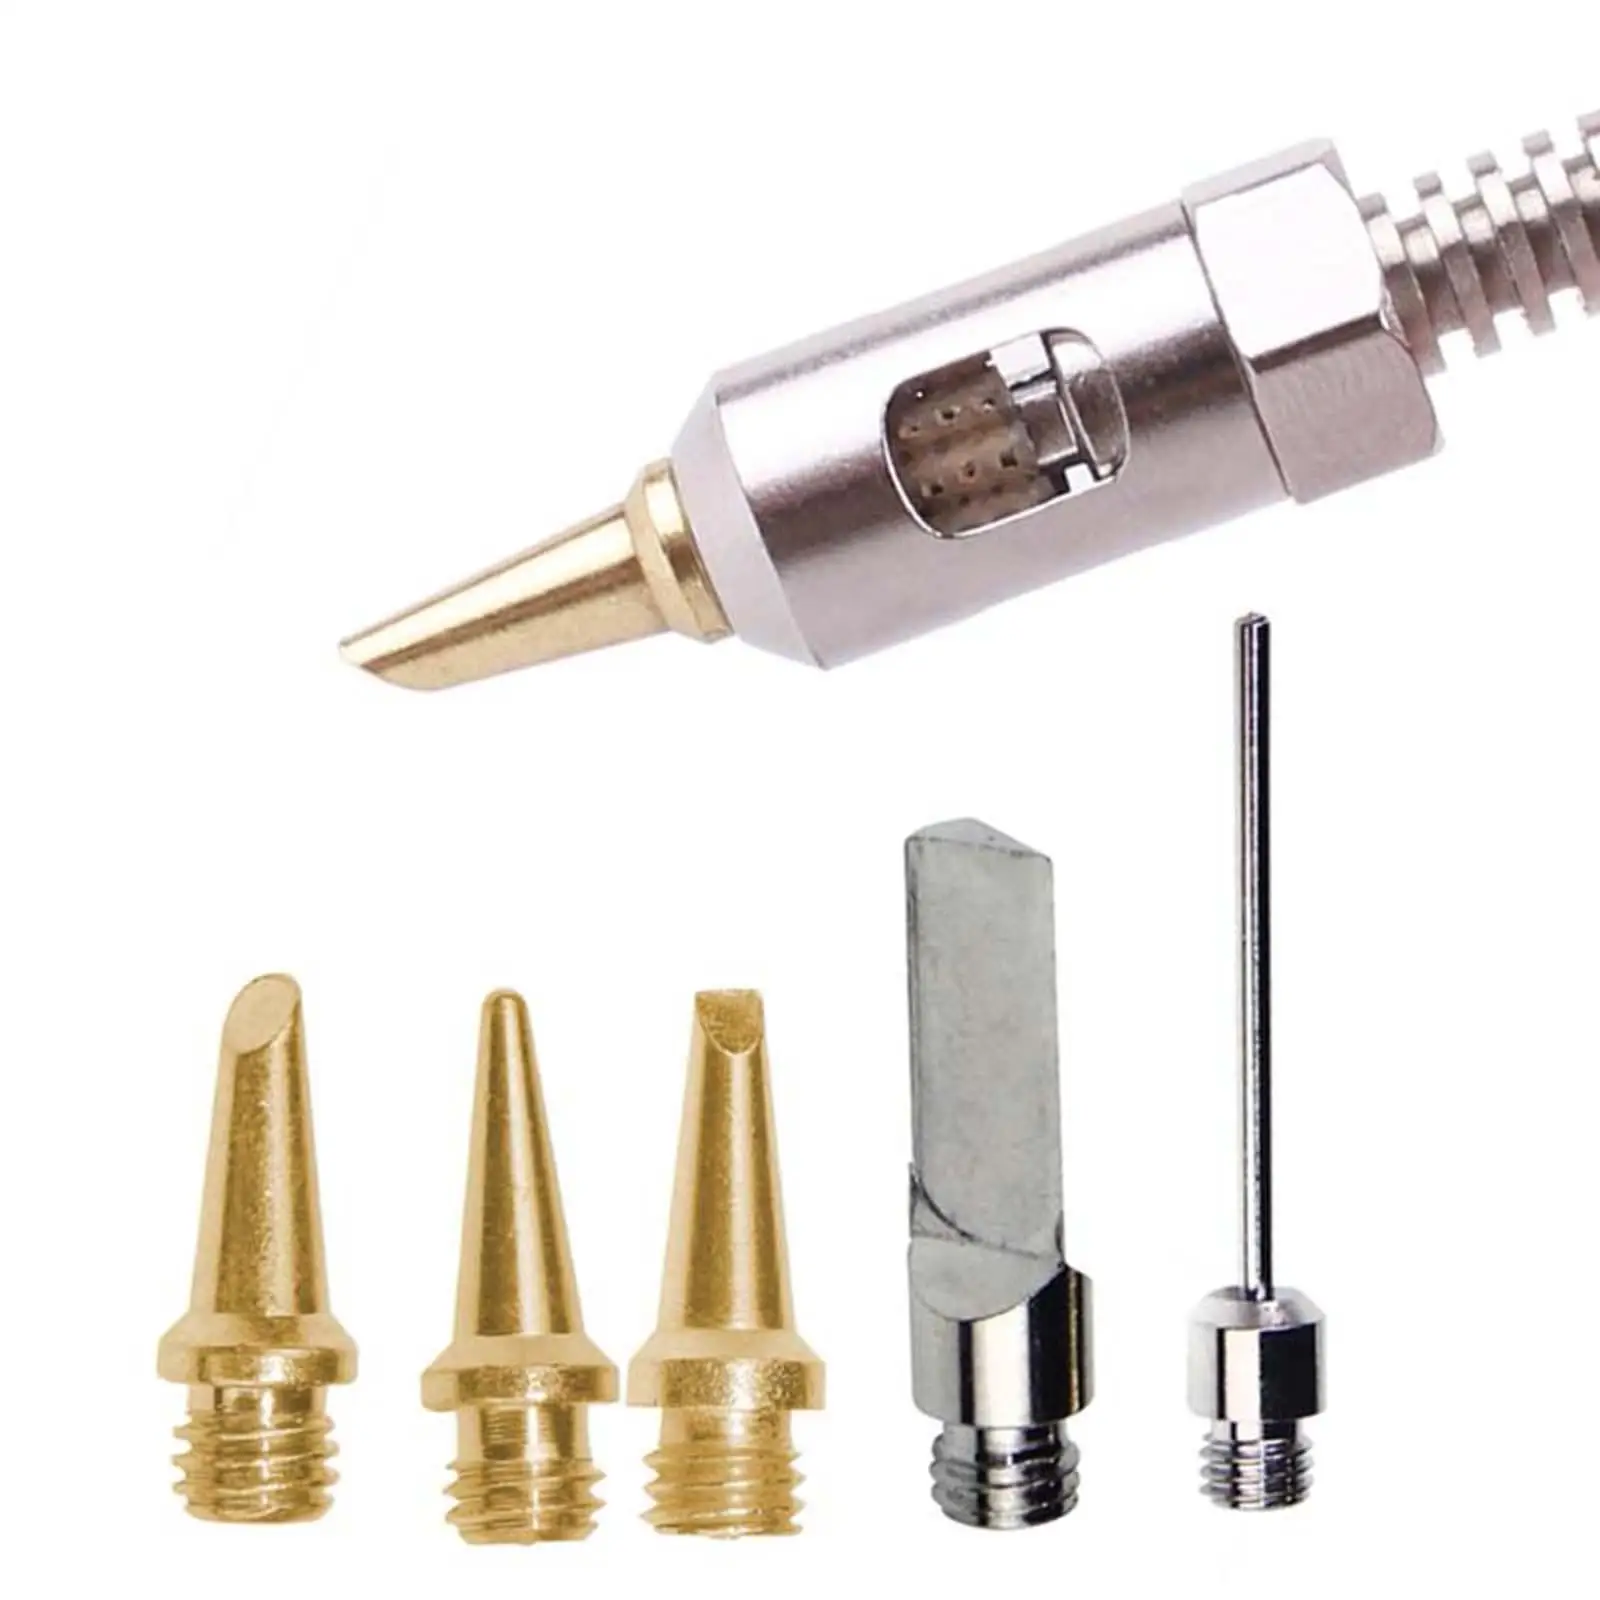 5 Pieces Metal Gas Soldering Iron Welding Torch Kit Replacement Accessories